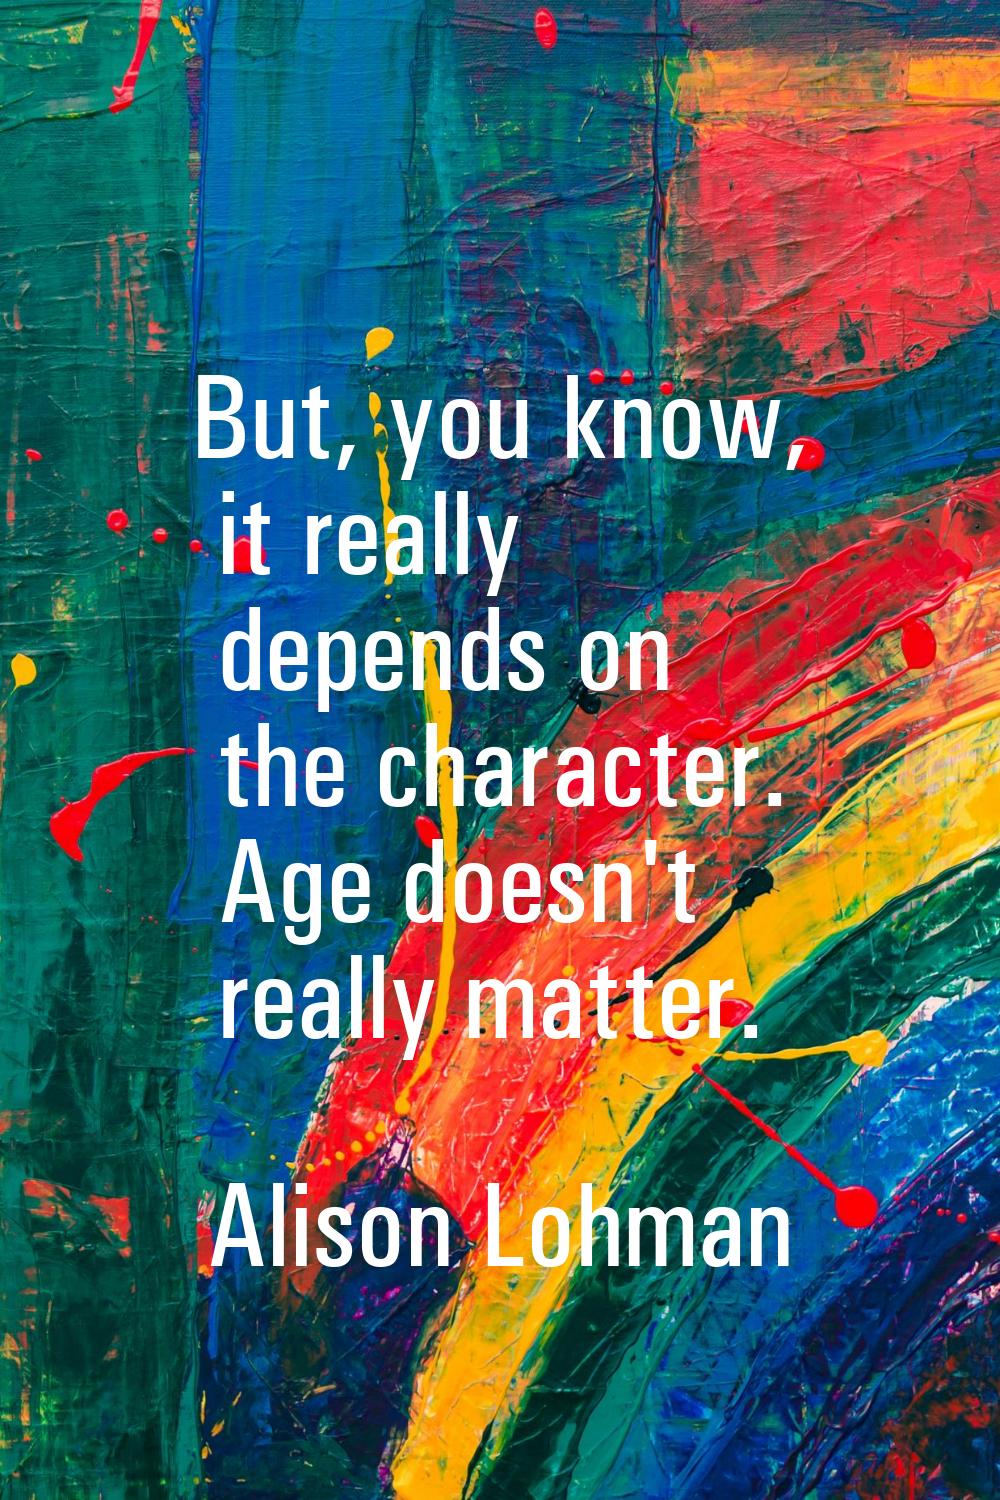 But, you know, it really depends on the character. Age doesn't really matter.